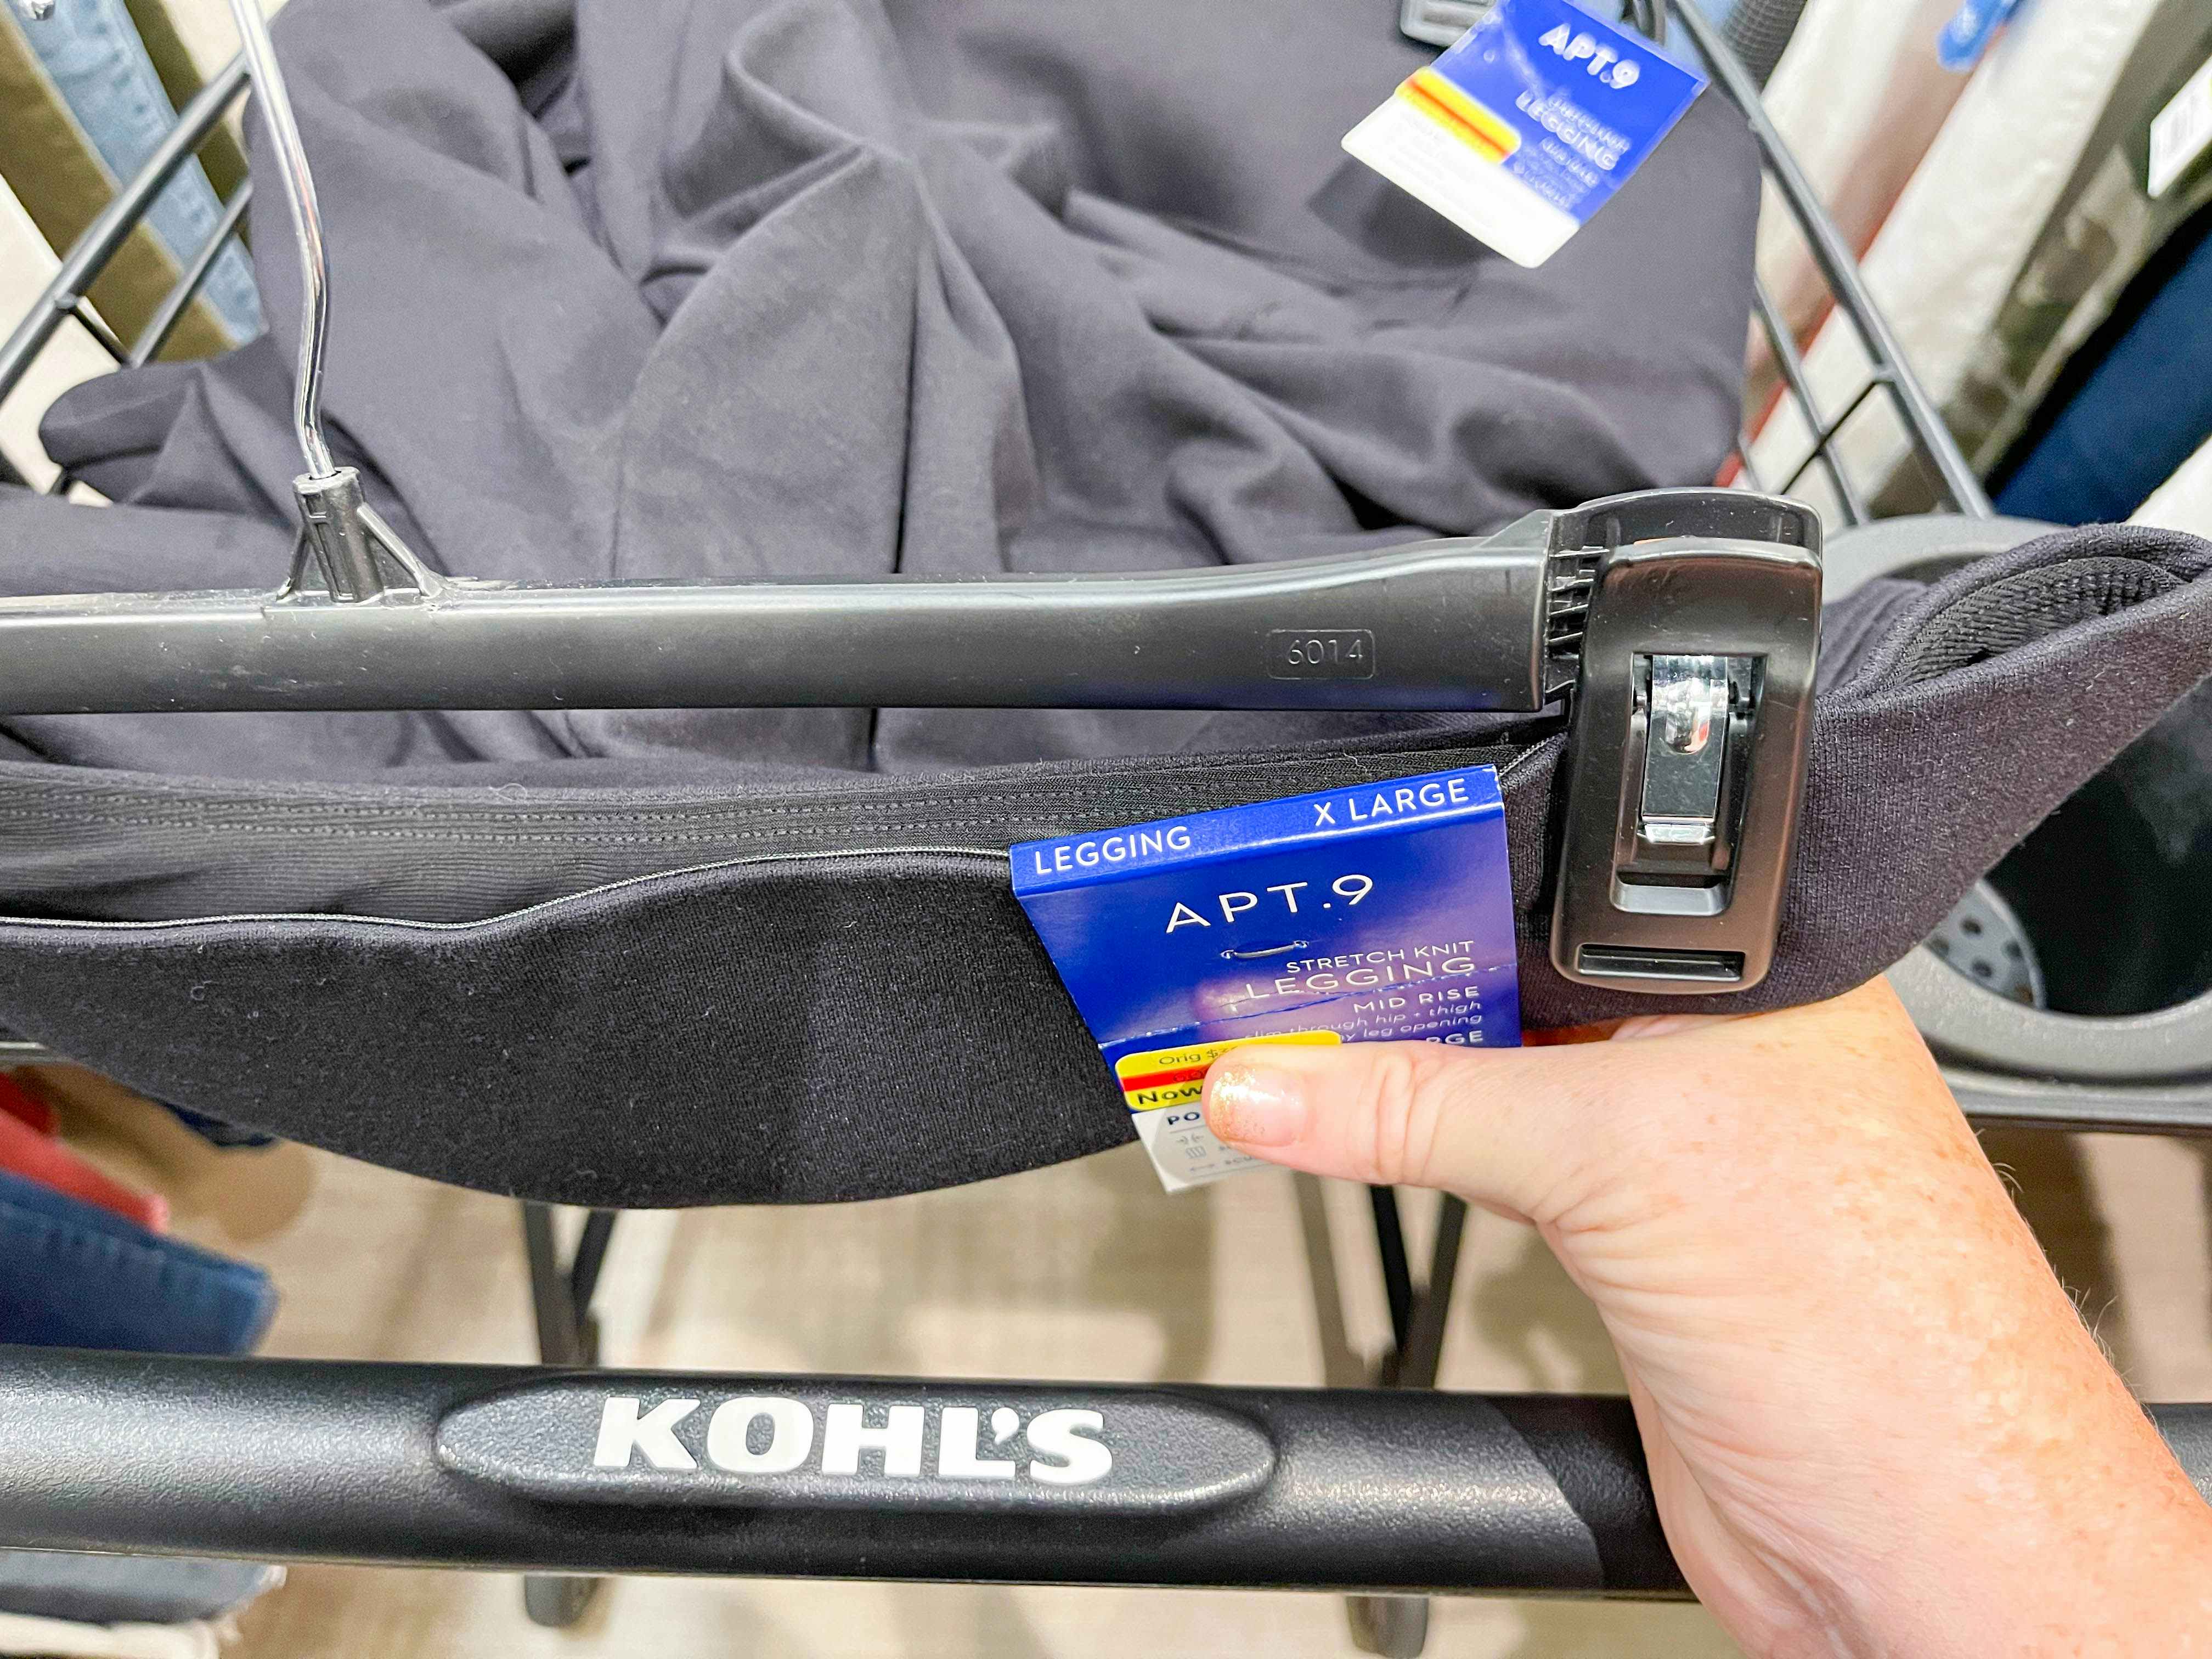 A person putting clearance black leggings into a Kohl's shopping cart.